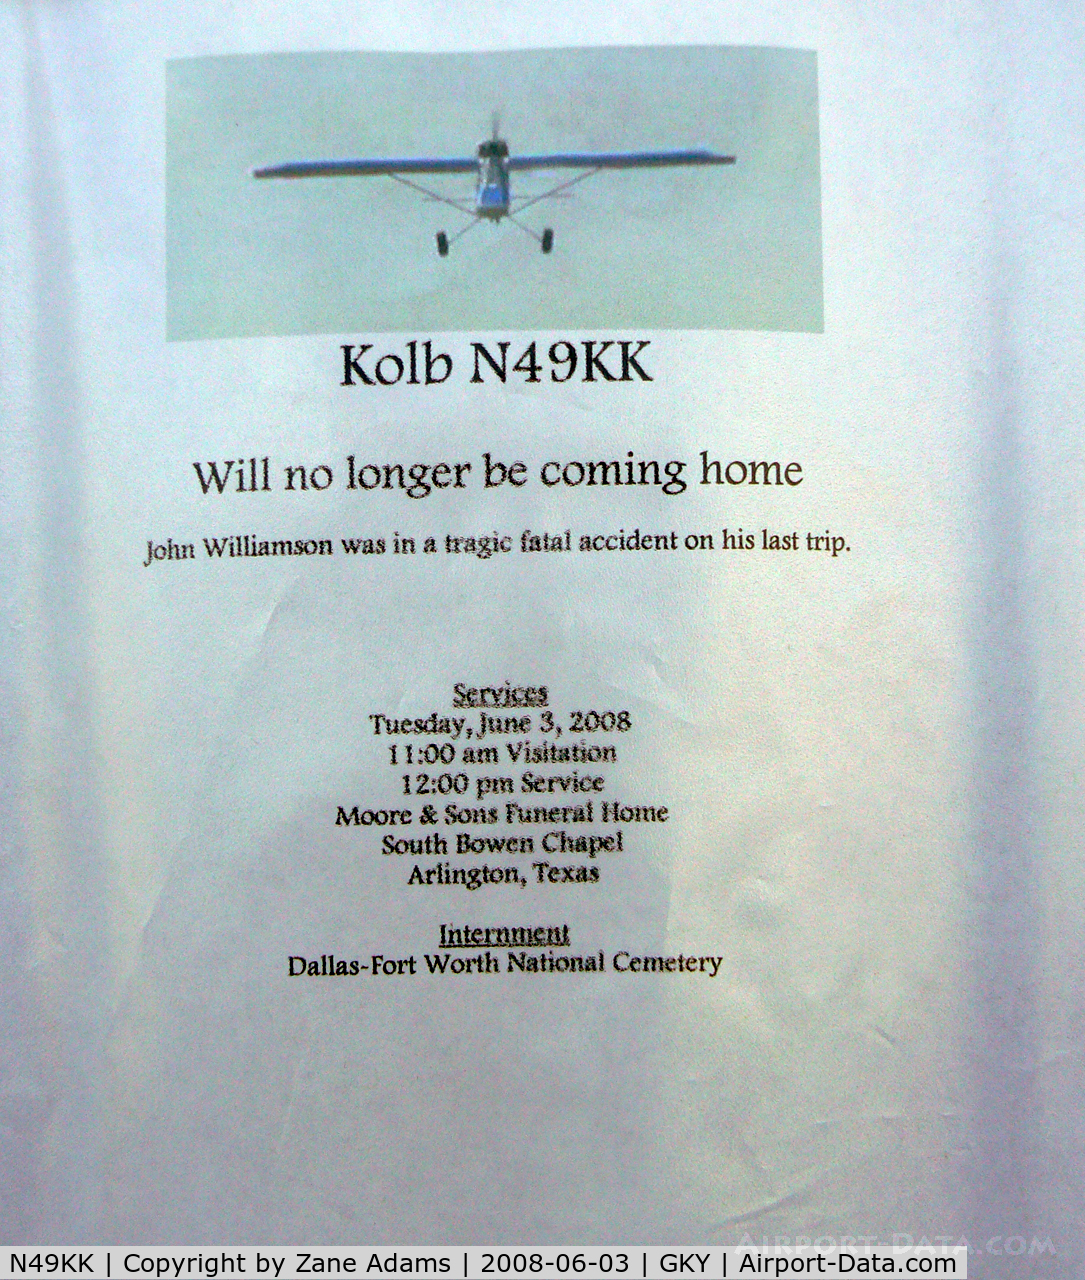 N49KK, 2002 Kolb Kolbra C/N KB01-3-00008, This note was attached to the hanger door where N49kk has been stored for many years...Quite a shock. I did not know the man but I had spoken with him on several occasions and was always fascinated by his airplane. God rest his soul.